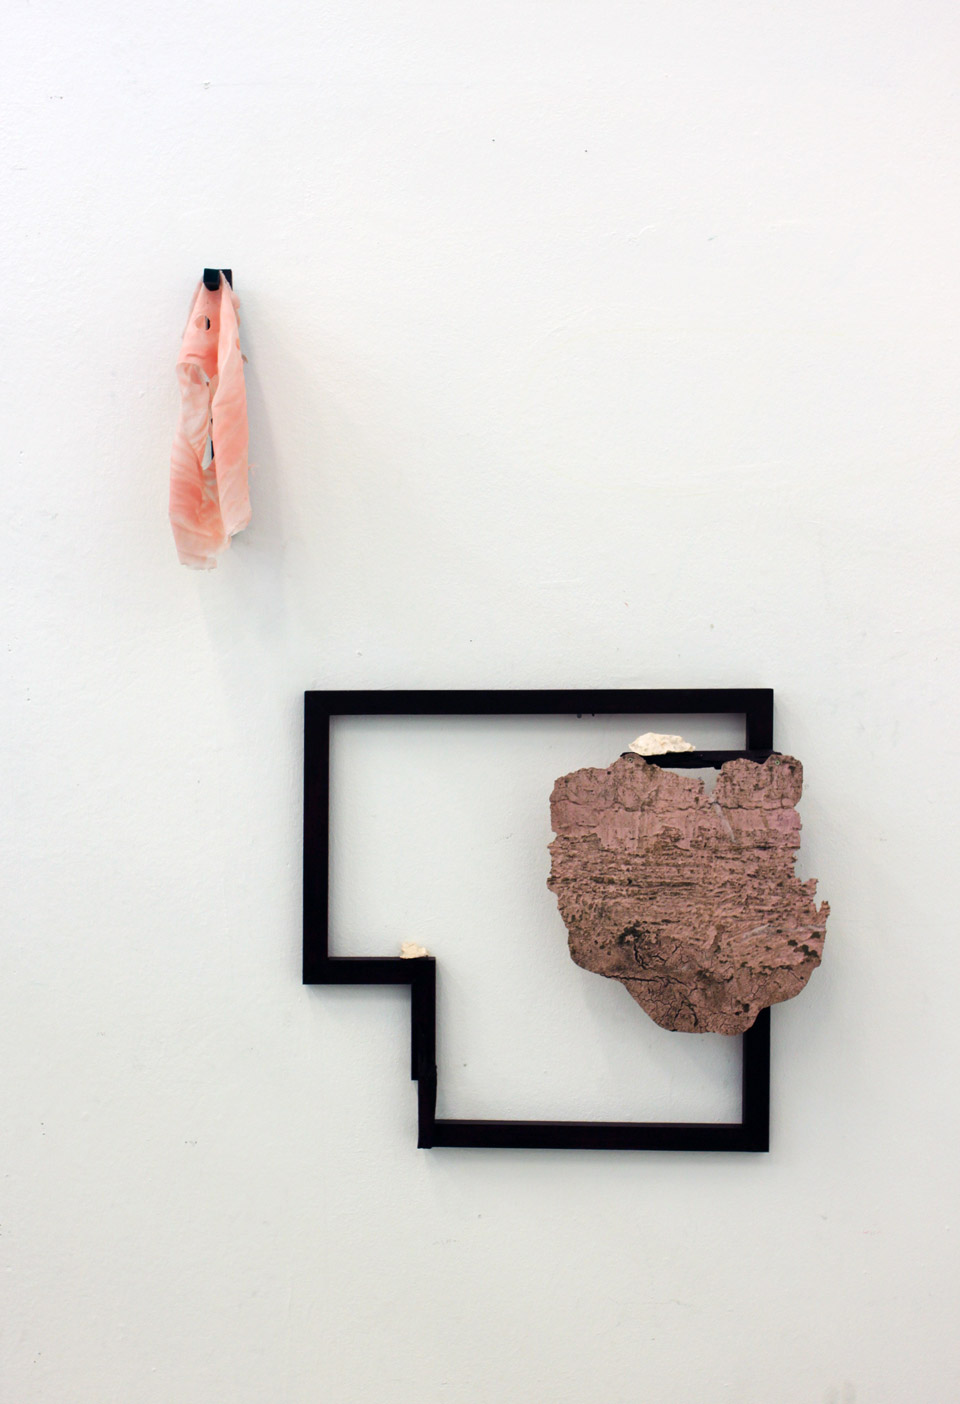 <p>Gower Street, 2013, silicon rubber and plaster casting, 35 x 45 cm</p>